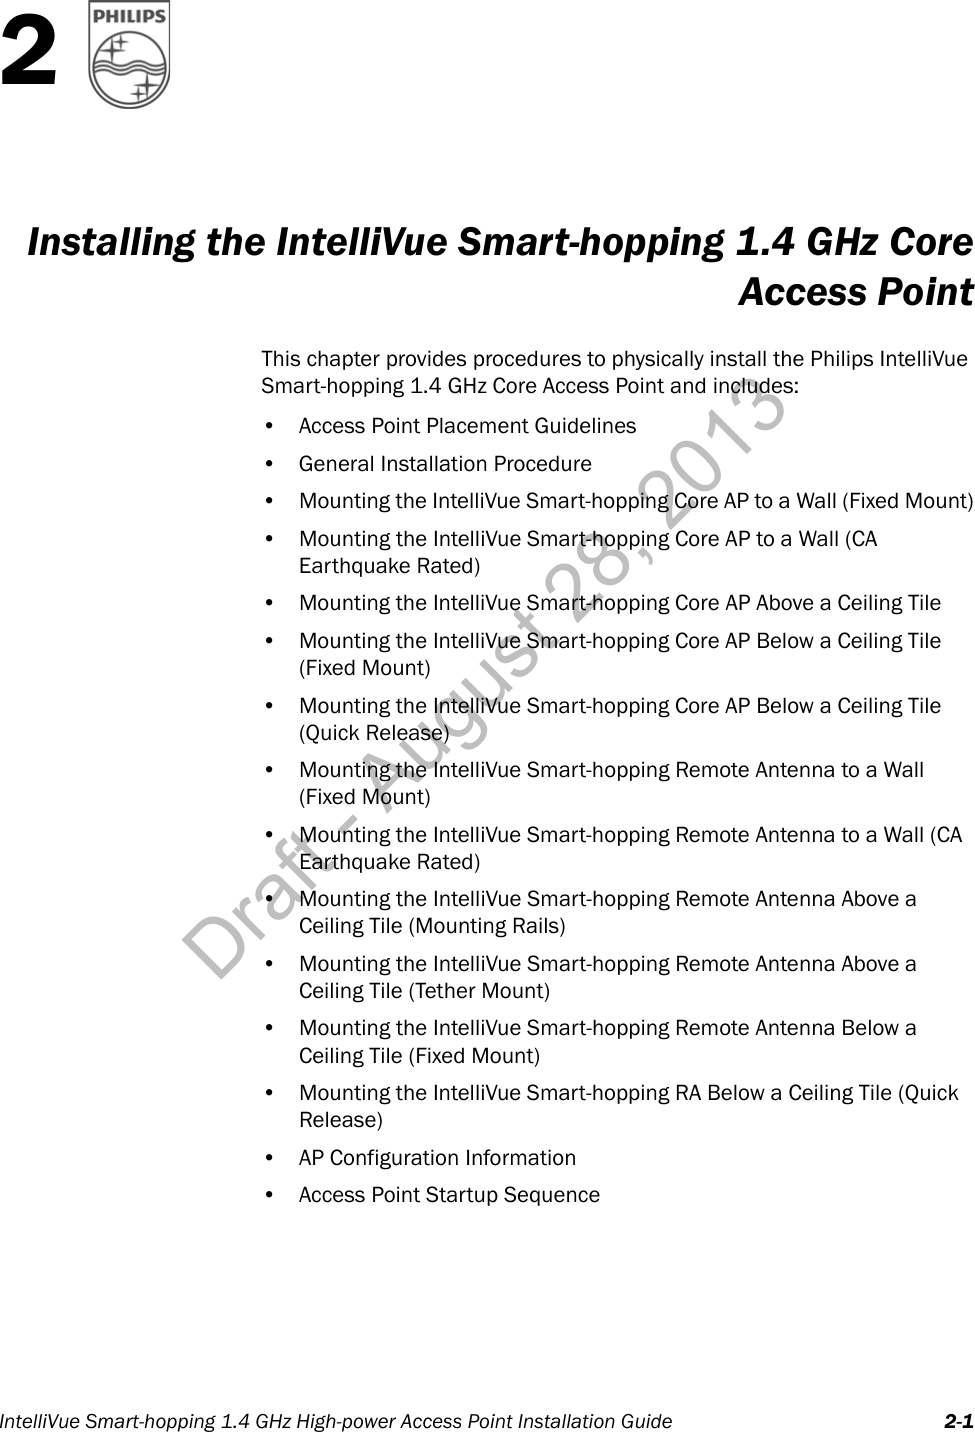 IntelliVue Smart-hopping 1.4 GHz High-power Access Point Installation Guide 2-12Installing the IntelliVue Smart-hopping 1.4 GHz CoreAccess PointThis chapter provides procedures to physically install the Philips IntelliVue Smart-hopping 1.4 GHz Core Access Point and includes:• Access Point Placement Guidelines• General Installation Procedure• Mounting the IntelliVue Smart-hopping Core AP to a Wall (Fixed Mount)• Mounting the IntelliVue Smart-hopping Core AP to a Wall (CA Earthquake Rated)• Mounting the IntelliVue Smart-hopping Core AP Above a Ceiling Tile• Mounting the IntelliVue Smart-hopping Core AP Below a Ceiling Tile (Fixed Mount)• Mounting the IntelliVue Smart-hopping Core AP Below a Ceiling Tile (Quick Release)• Mounting the IntelliVue Smart-hopping Remote Antenna to a Wall (Fixed Mount)• Mounting the IntelliVue Smart-hopping Remote Antenna to a Wall (CA Earthquake Rated)• Mounting the IntelliVue Smart-hopping Remote Antenna Above a Ceiling Tile (Mounting Rails)• Mounting the IntelliVue Smart-hopping Remote Antenna Above a Ceiling Tile (Tether Mount)• Mounting the IntelliVue Smart-hopping Remote Antenna Below a Ceiling Tile (Fixed Mount)•Mounting the IntelliVue Smart-hopping RA Below a Ceiling Tile (Quick Release)• AP Configuration Information• Access Point Startup SequenceDraft - August 28, 2013